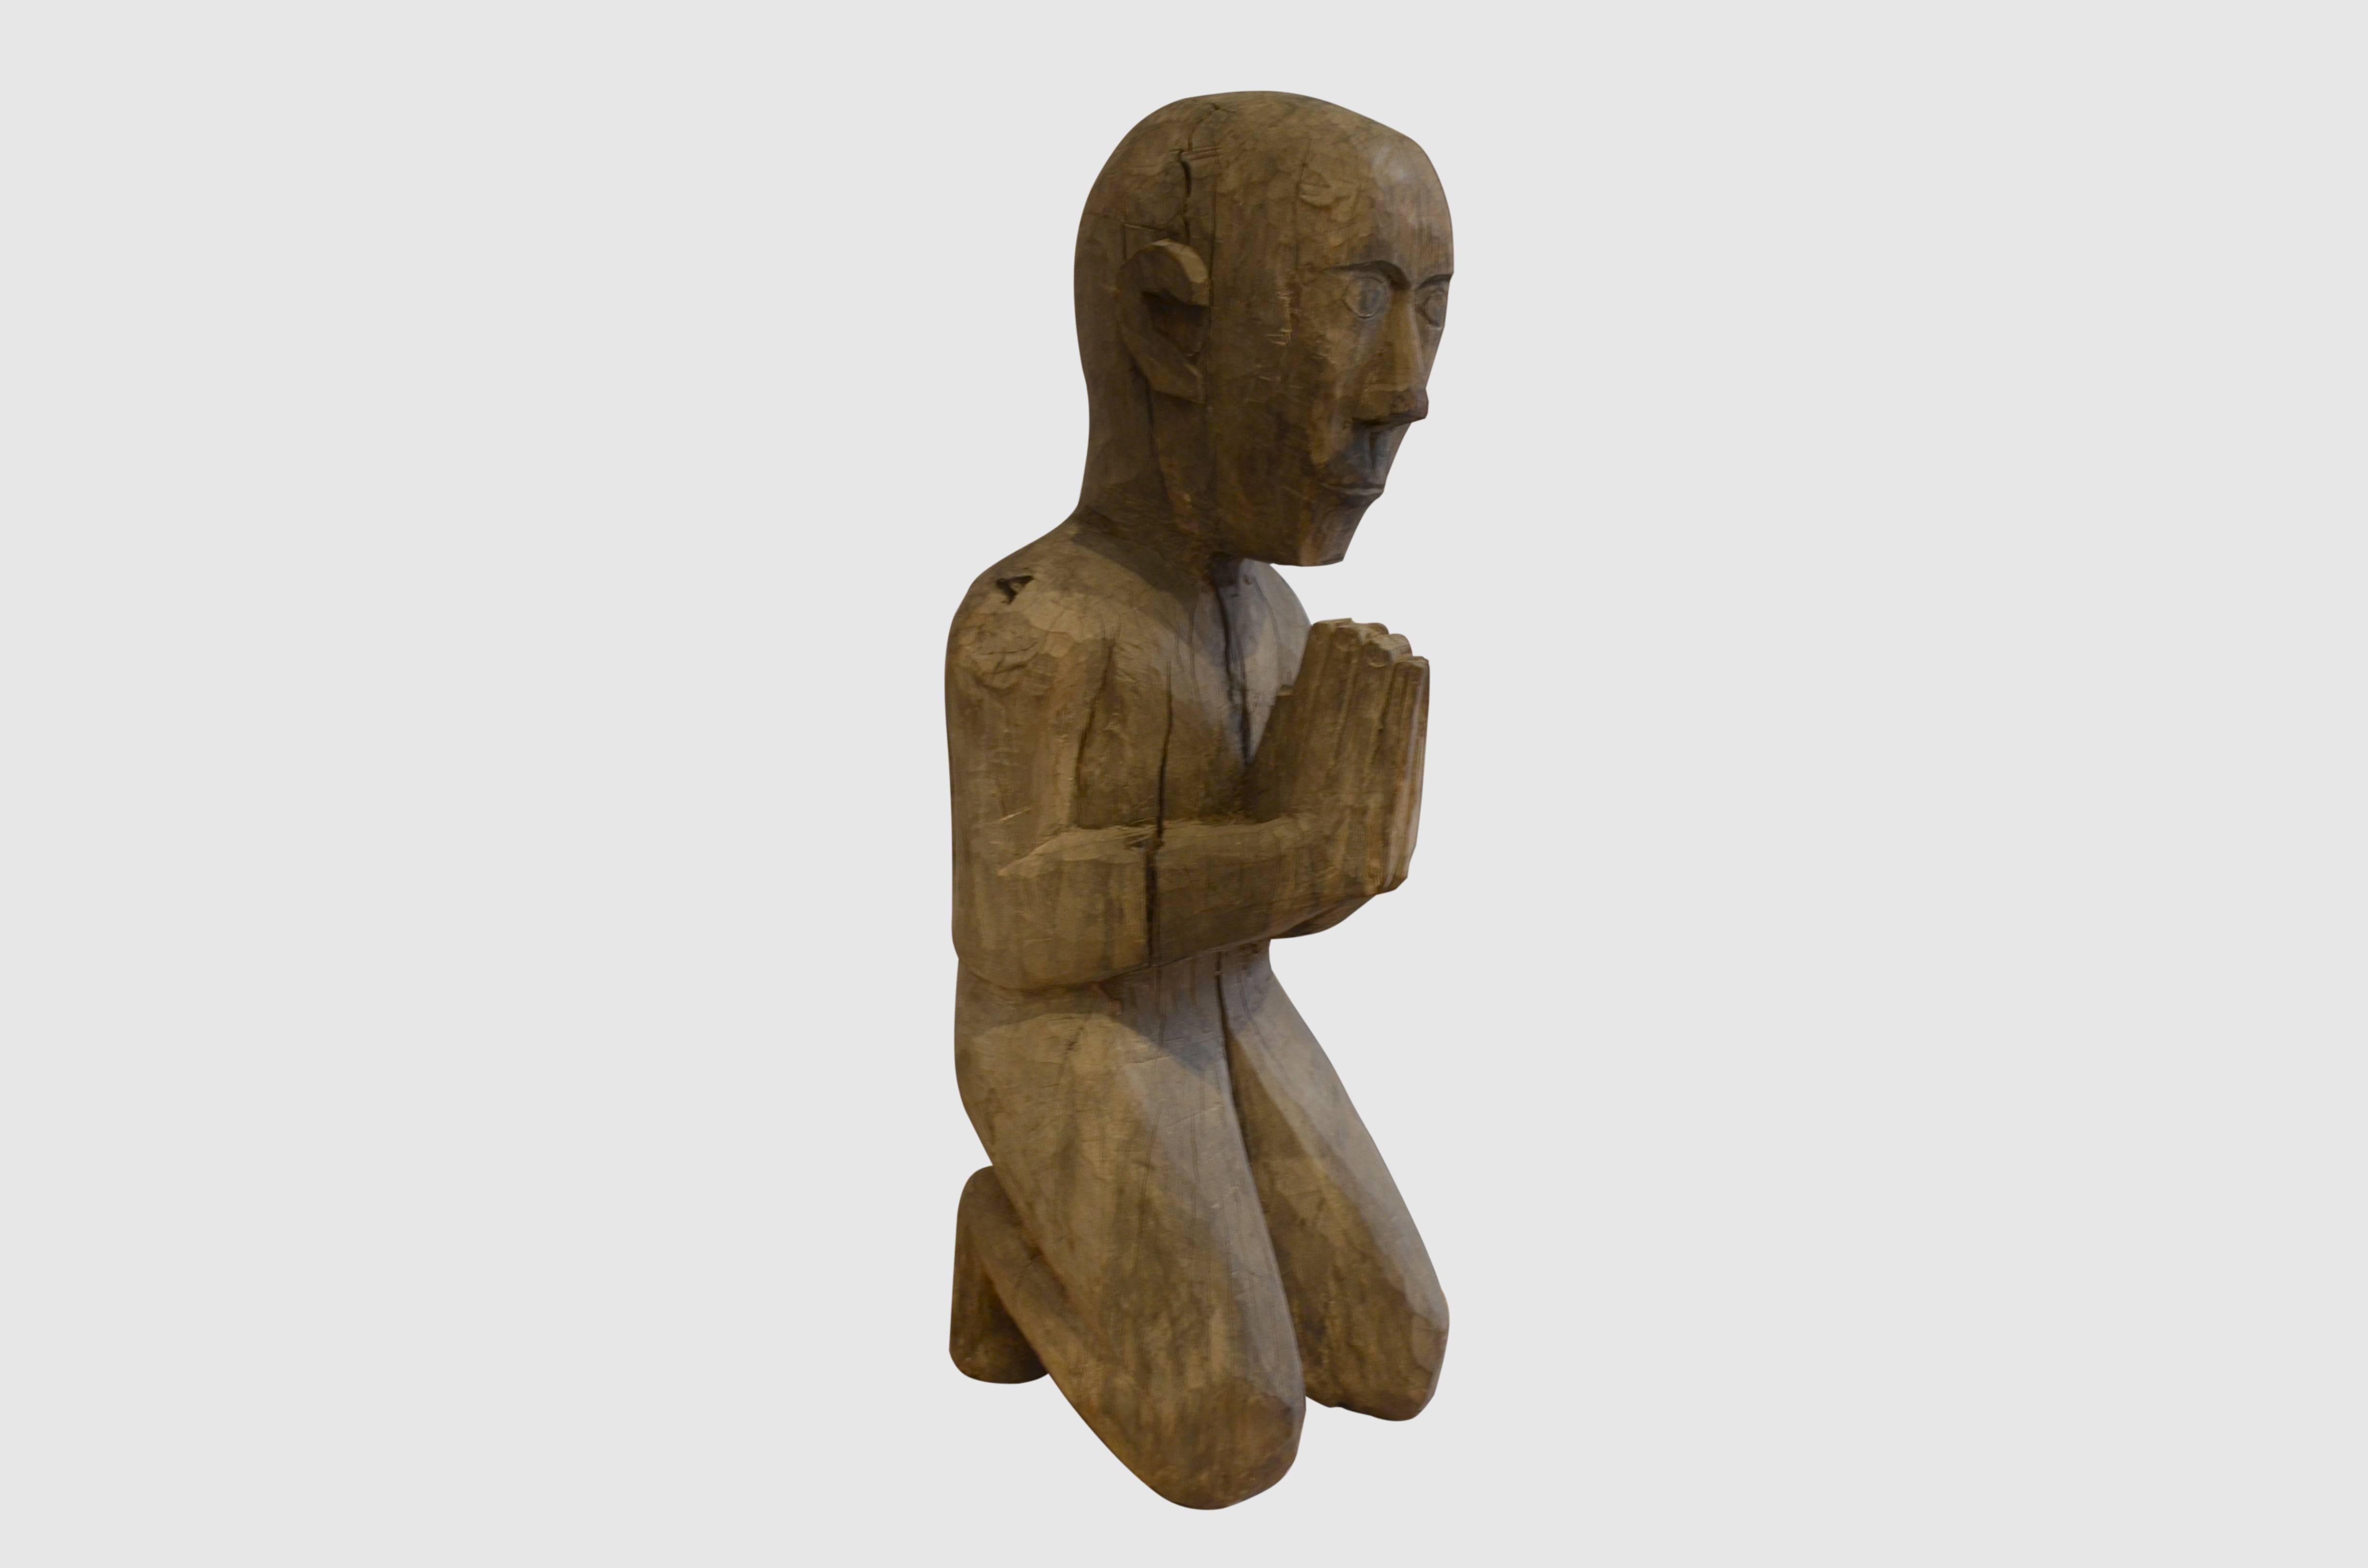 Antique Primitive man from Sumatra praying. Carved from a single piece of aged teak wood.